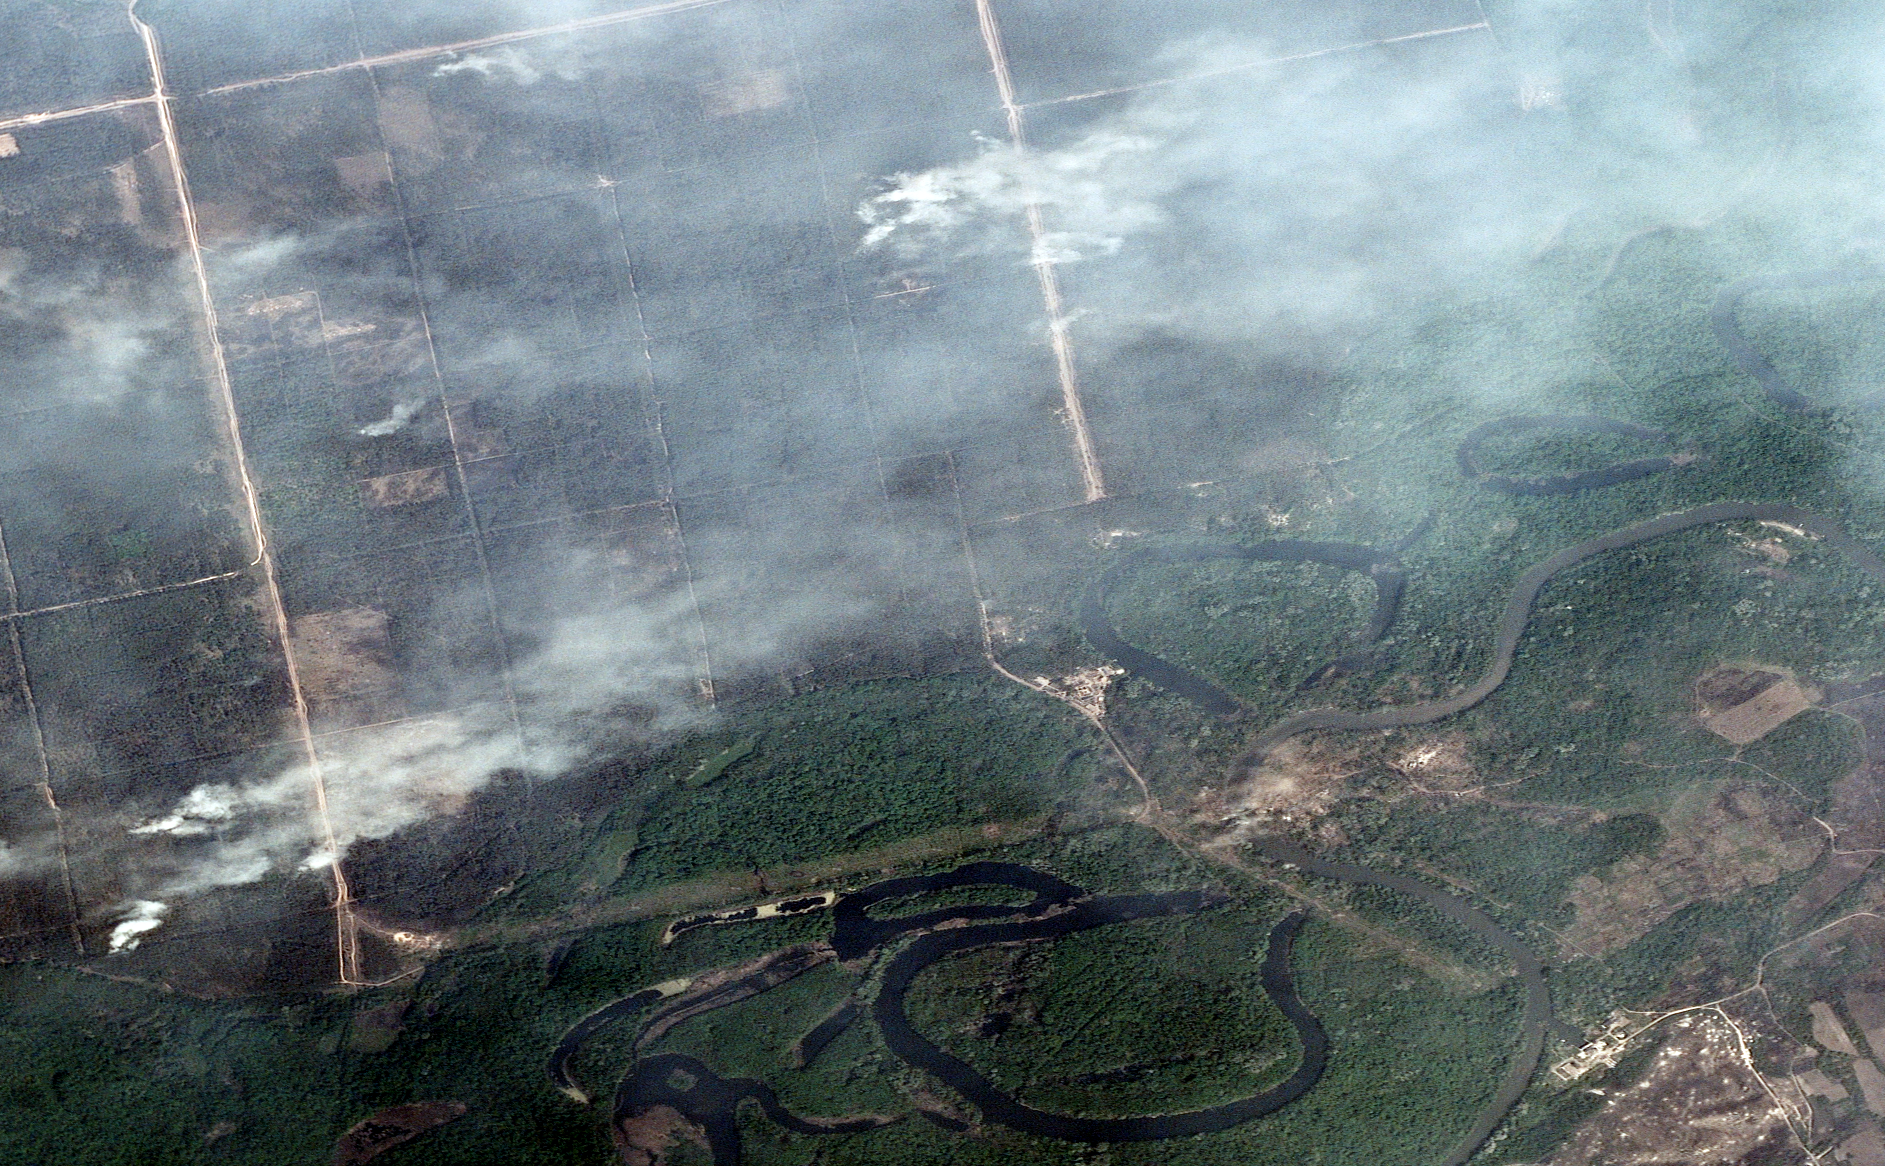 This satellite image shows large plumes of smoke rising above the Siverskyi Donets river on May 12 near Bilohorivka, Ukraine. 